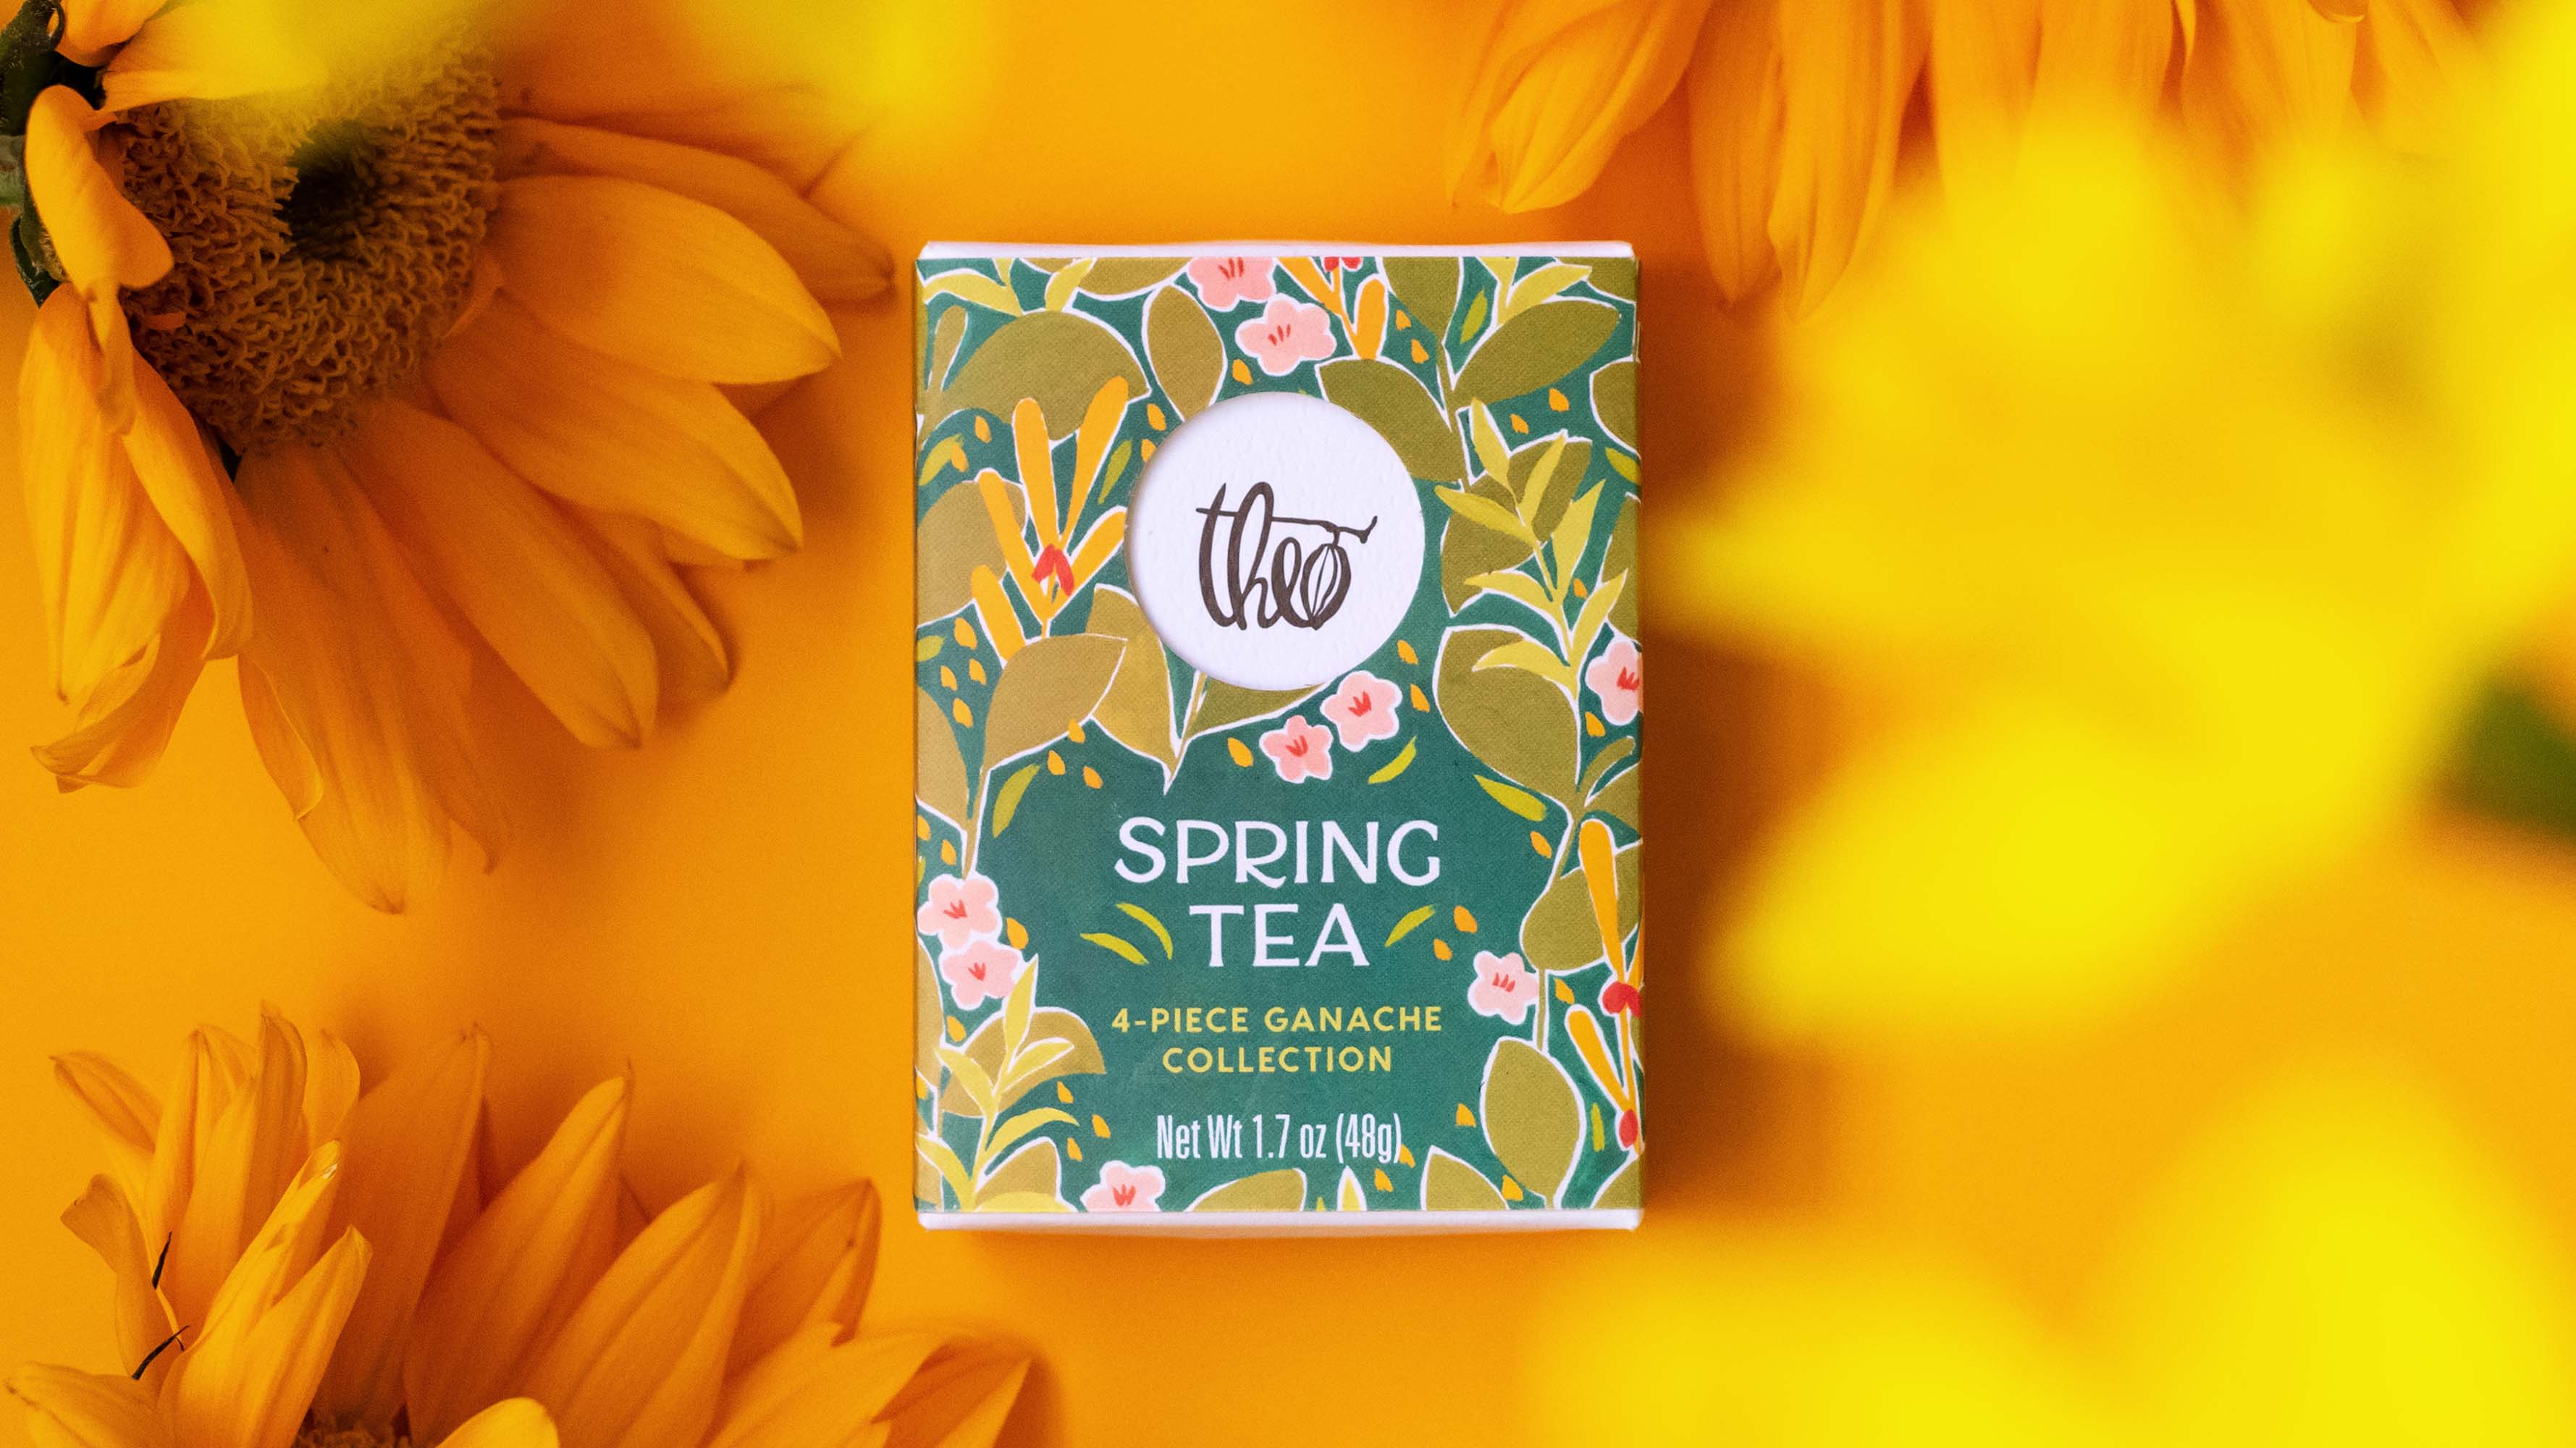 featured image:Theo Chocolate Spring Tea Confection Collection Packaging